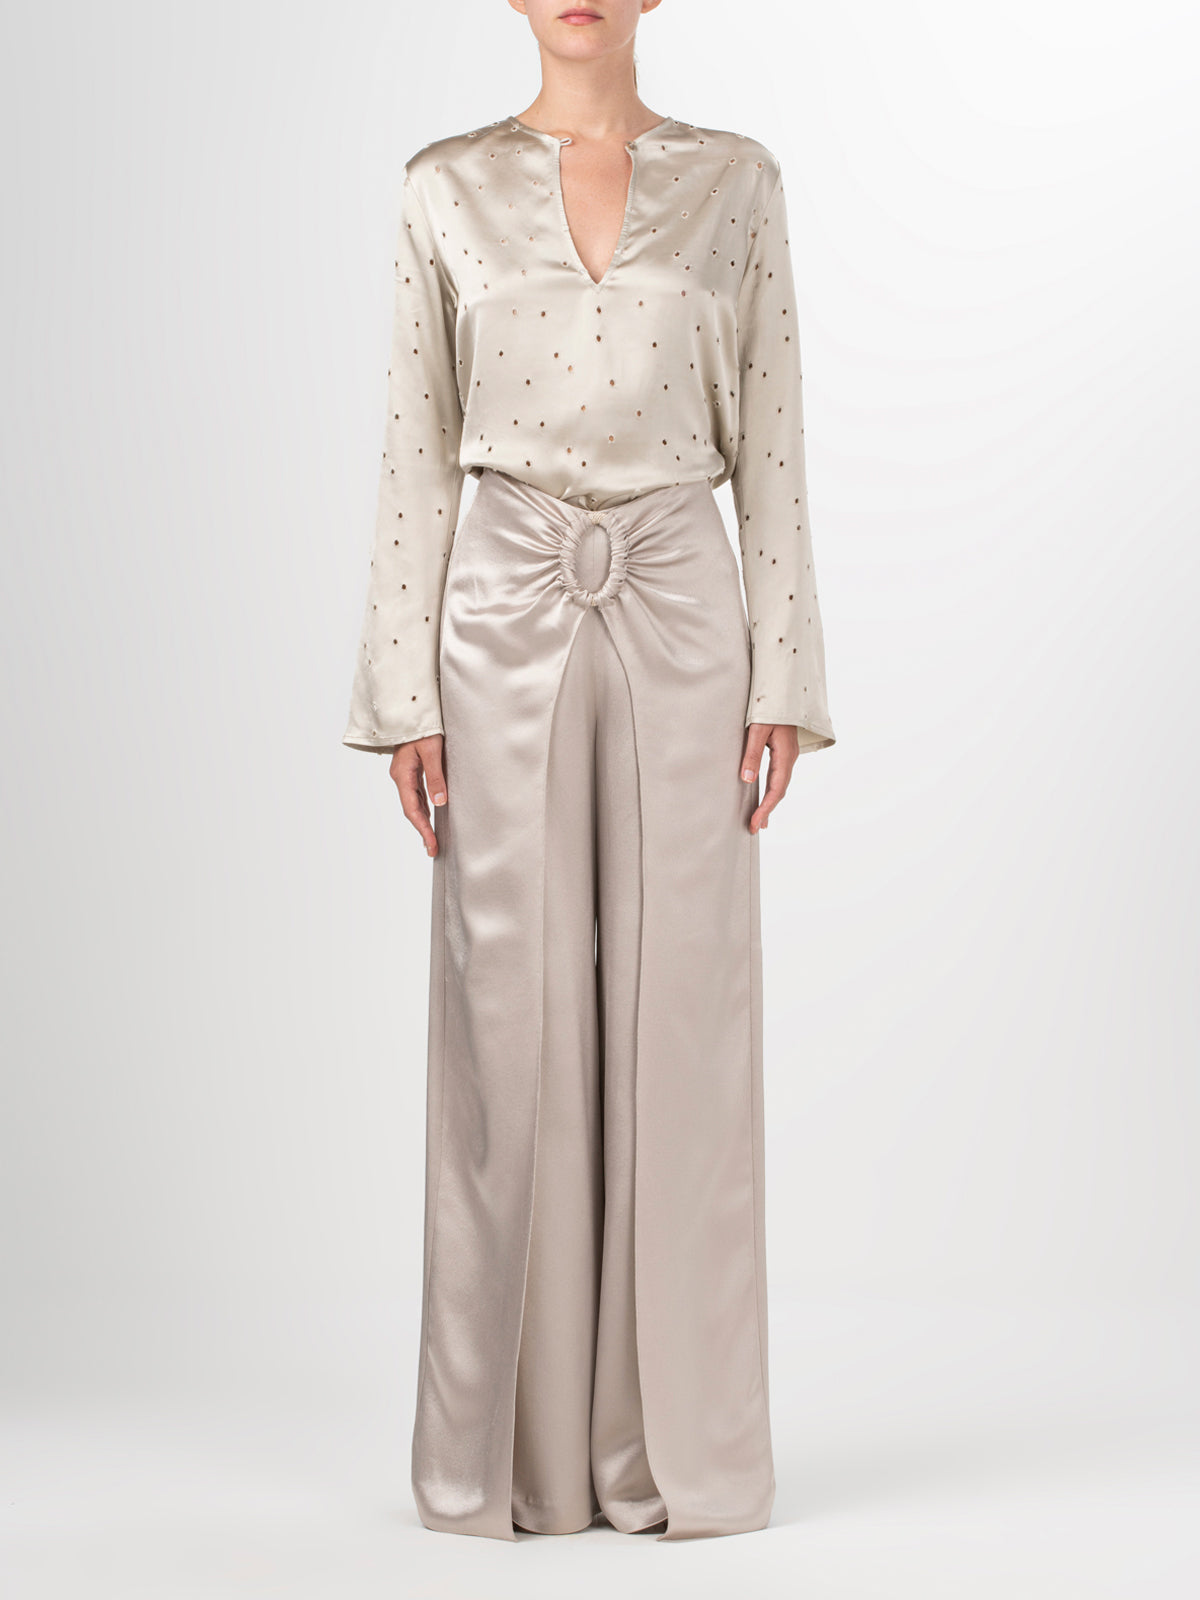 Beige high-waisted Belma Pant Ecru with a bow at the waist, featuring a wide leg silhouette.